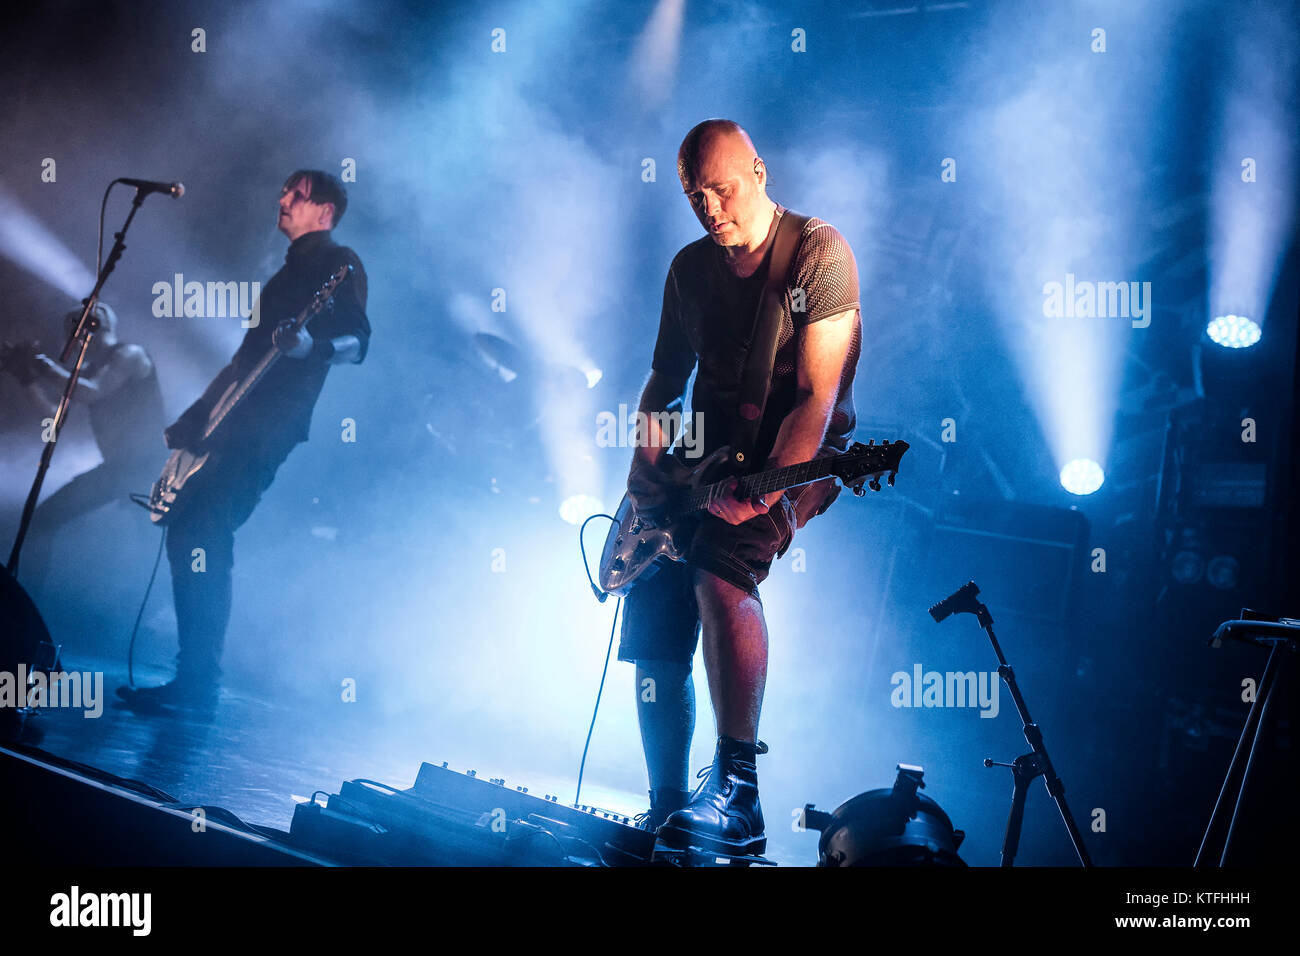 The alternative Norwegian rock band Seigmen (previously known as Klisne Seigmenn) performs a live concert at Sentrum Scene. Here guitarist Sverre Økshoff is seen live on stage. Norway, 30/09 2016. Stock Photo